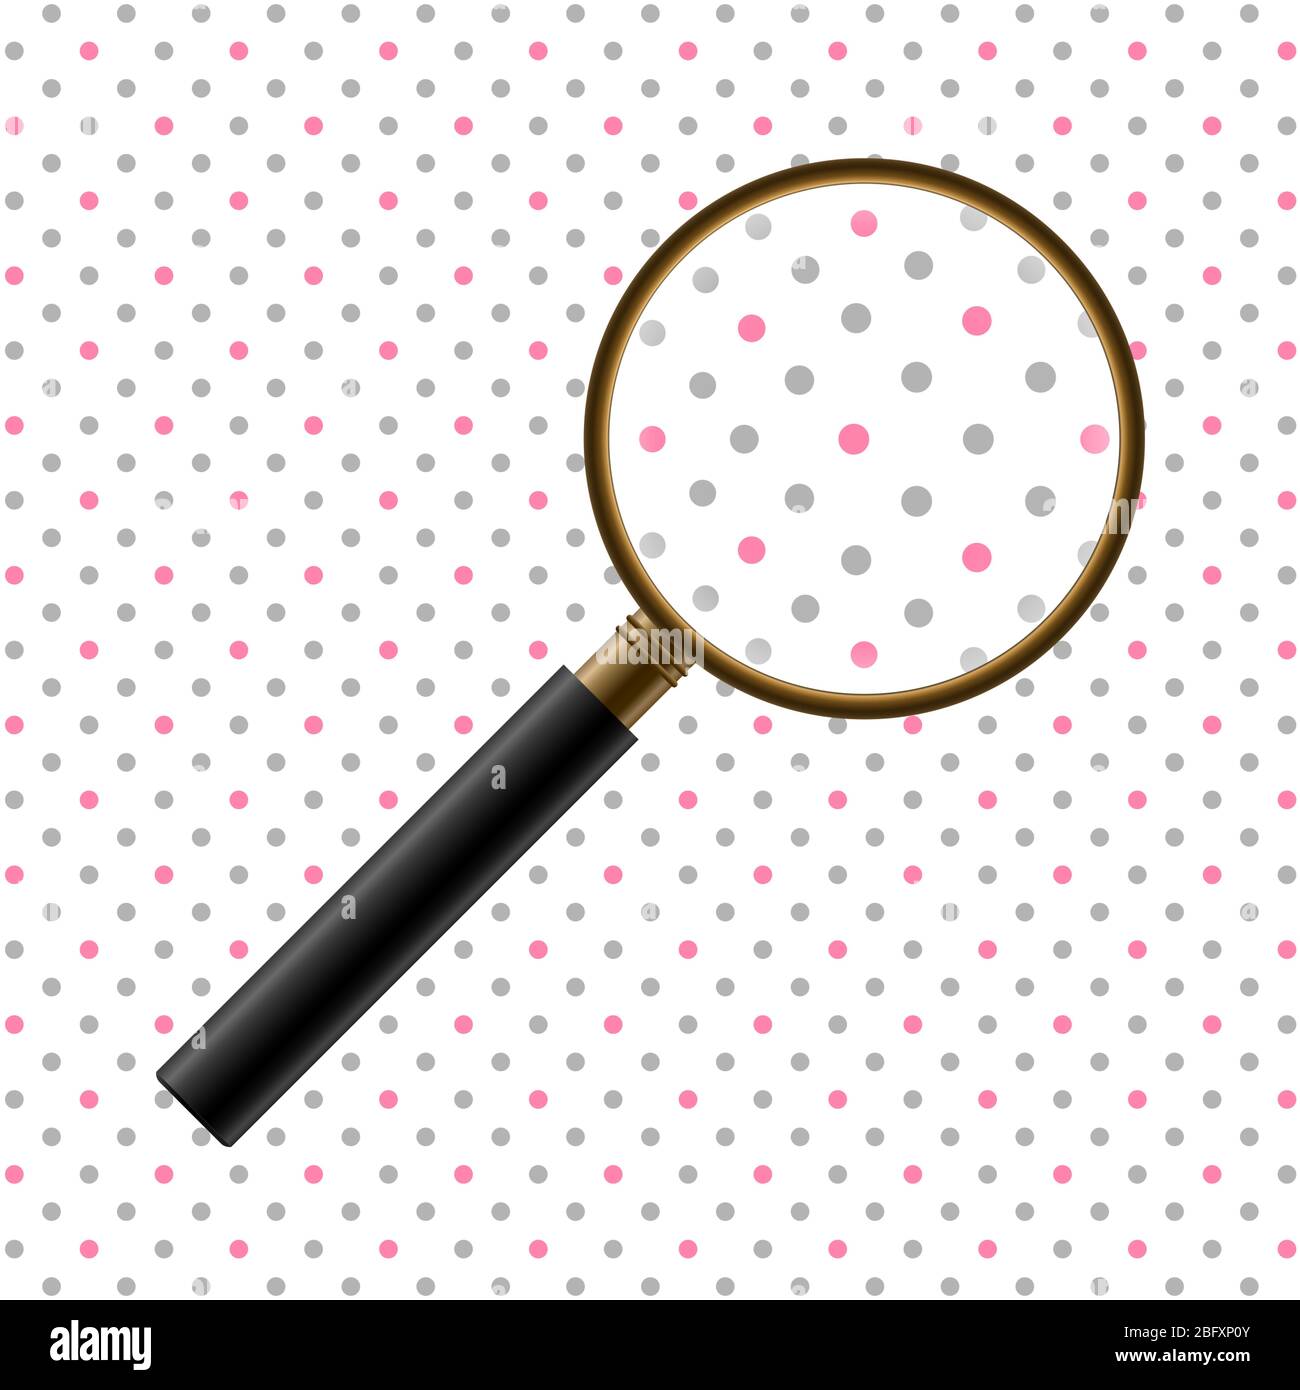 Vector Realistic Magnifier. Isolated Gold Metal Magnifying Glass With Black Handle Enlarging Dot Pattern. Zoom Tool With an Optical Lens. Scientific o Stock Vector